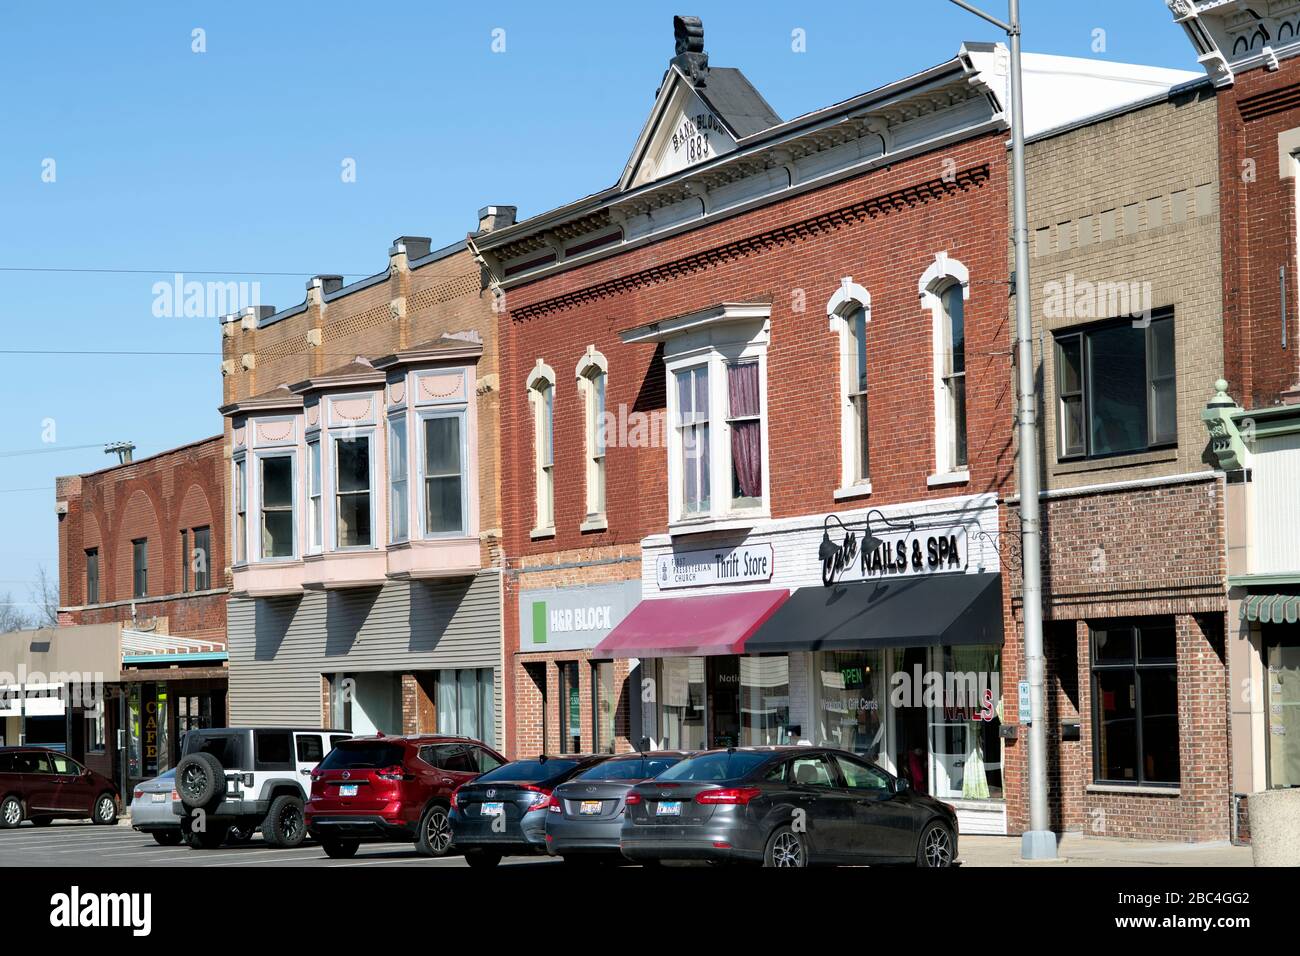 Marengo, Illinois, USA. The main street in the small northeastern Illinois community of Marengo is fairly typical of Midwestern United States hamlets. Stock Photo